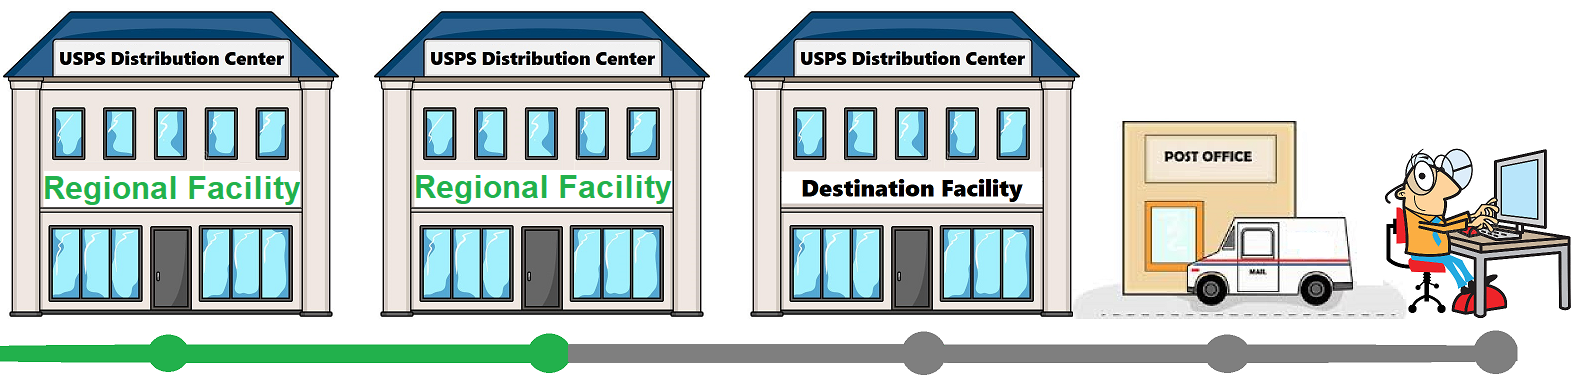 Package delivery lifespan from USPS facilities to post office